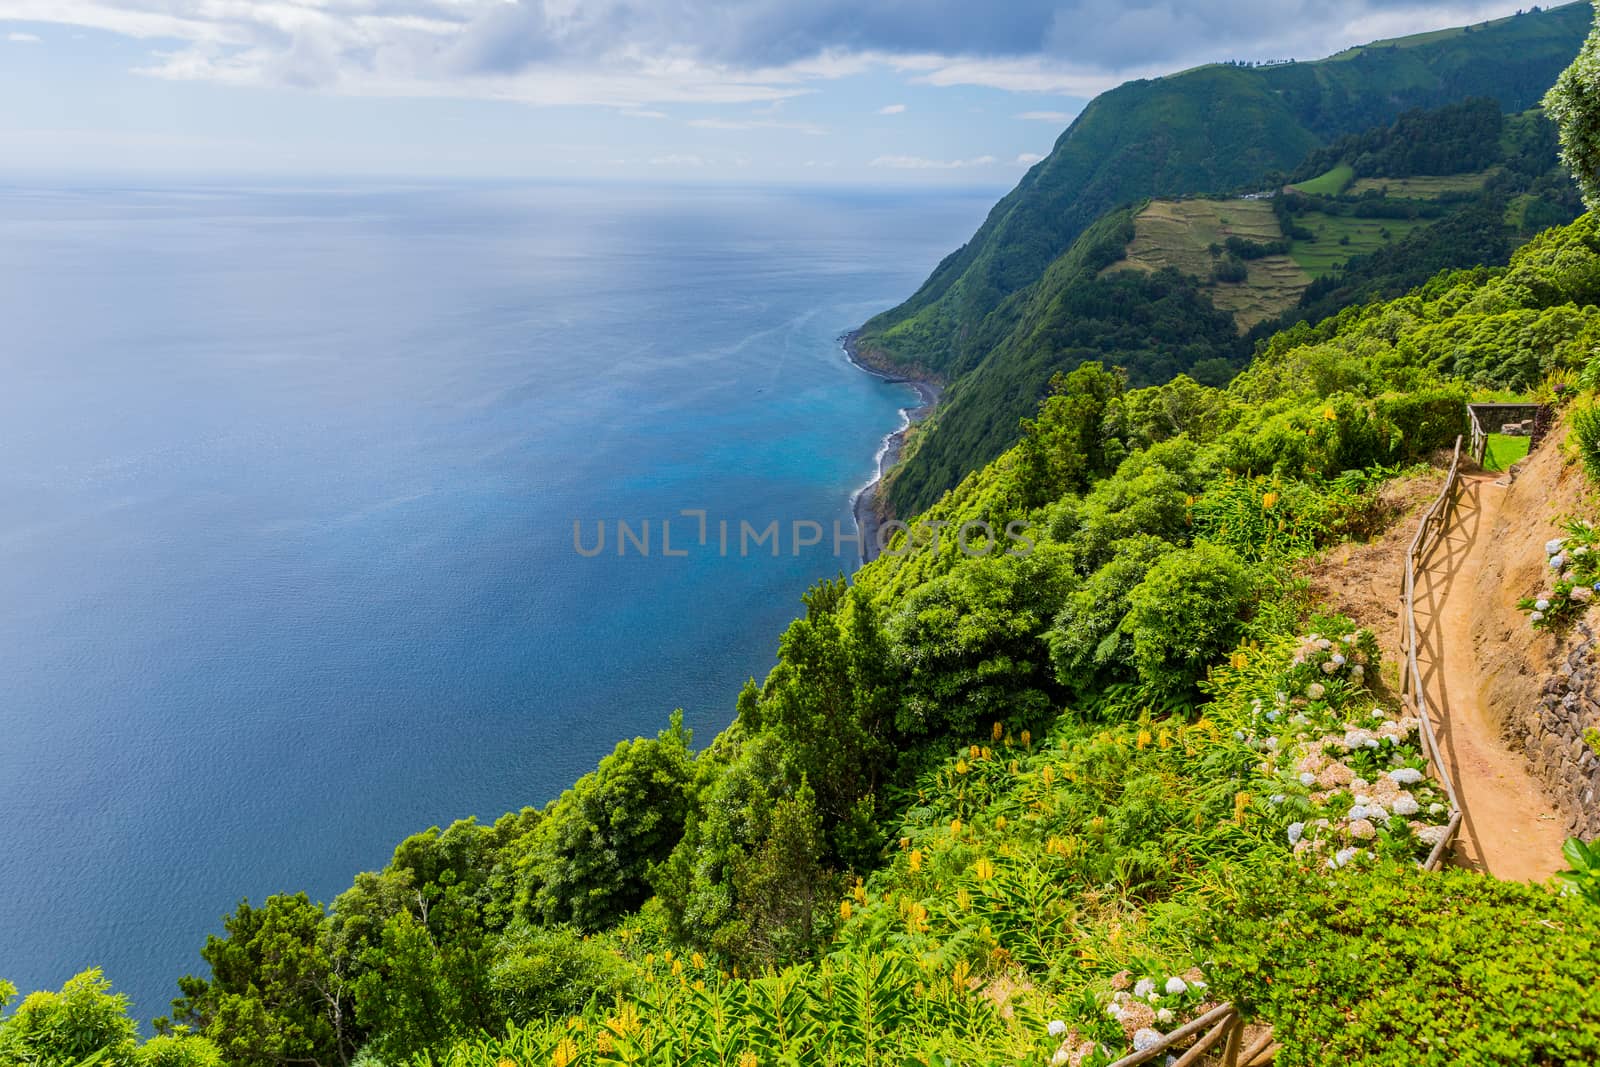 Northeast of the island of Sao Miguel in the Azores. Viewpoint of Ponta do Sossego. Amazingly point of interest in a major holiday destination of Portugal.